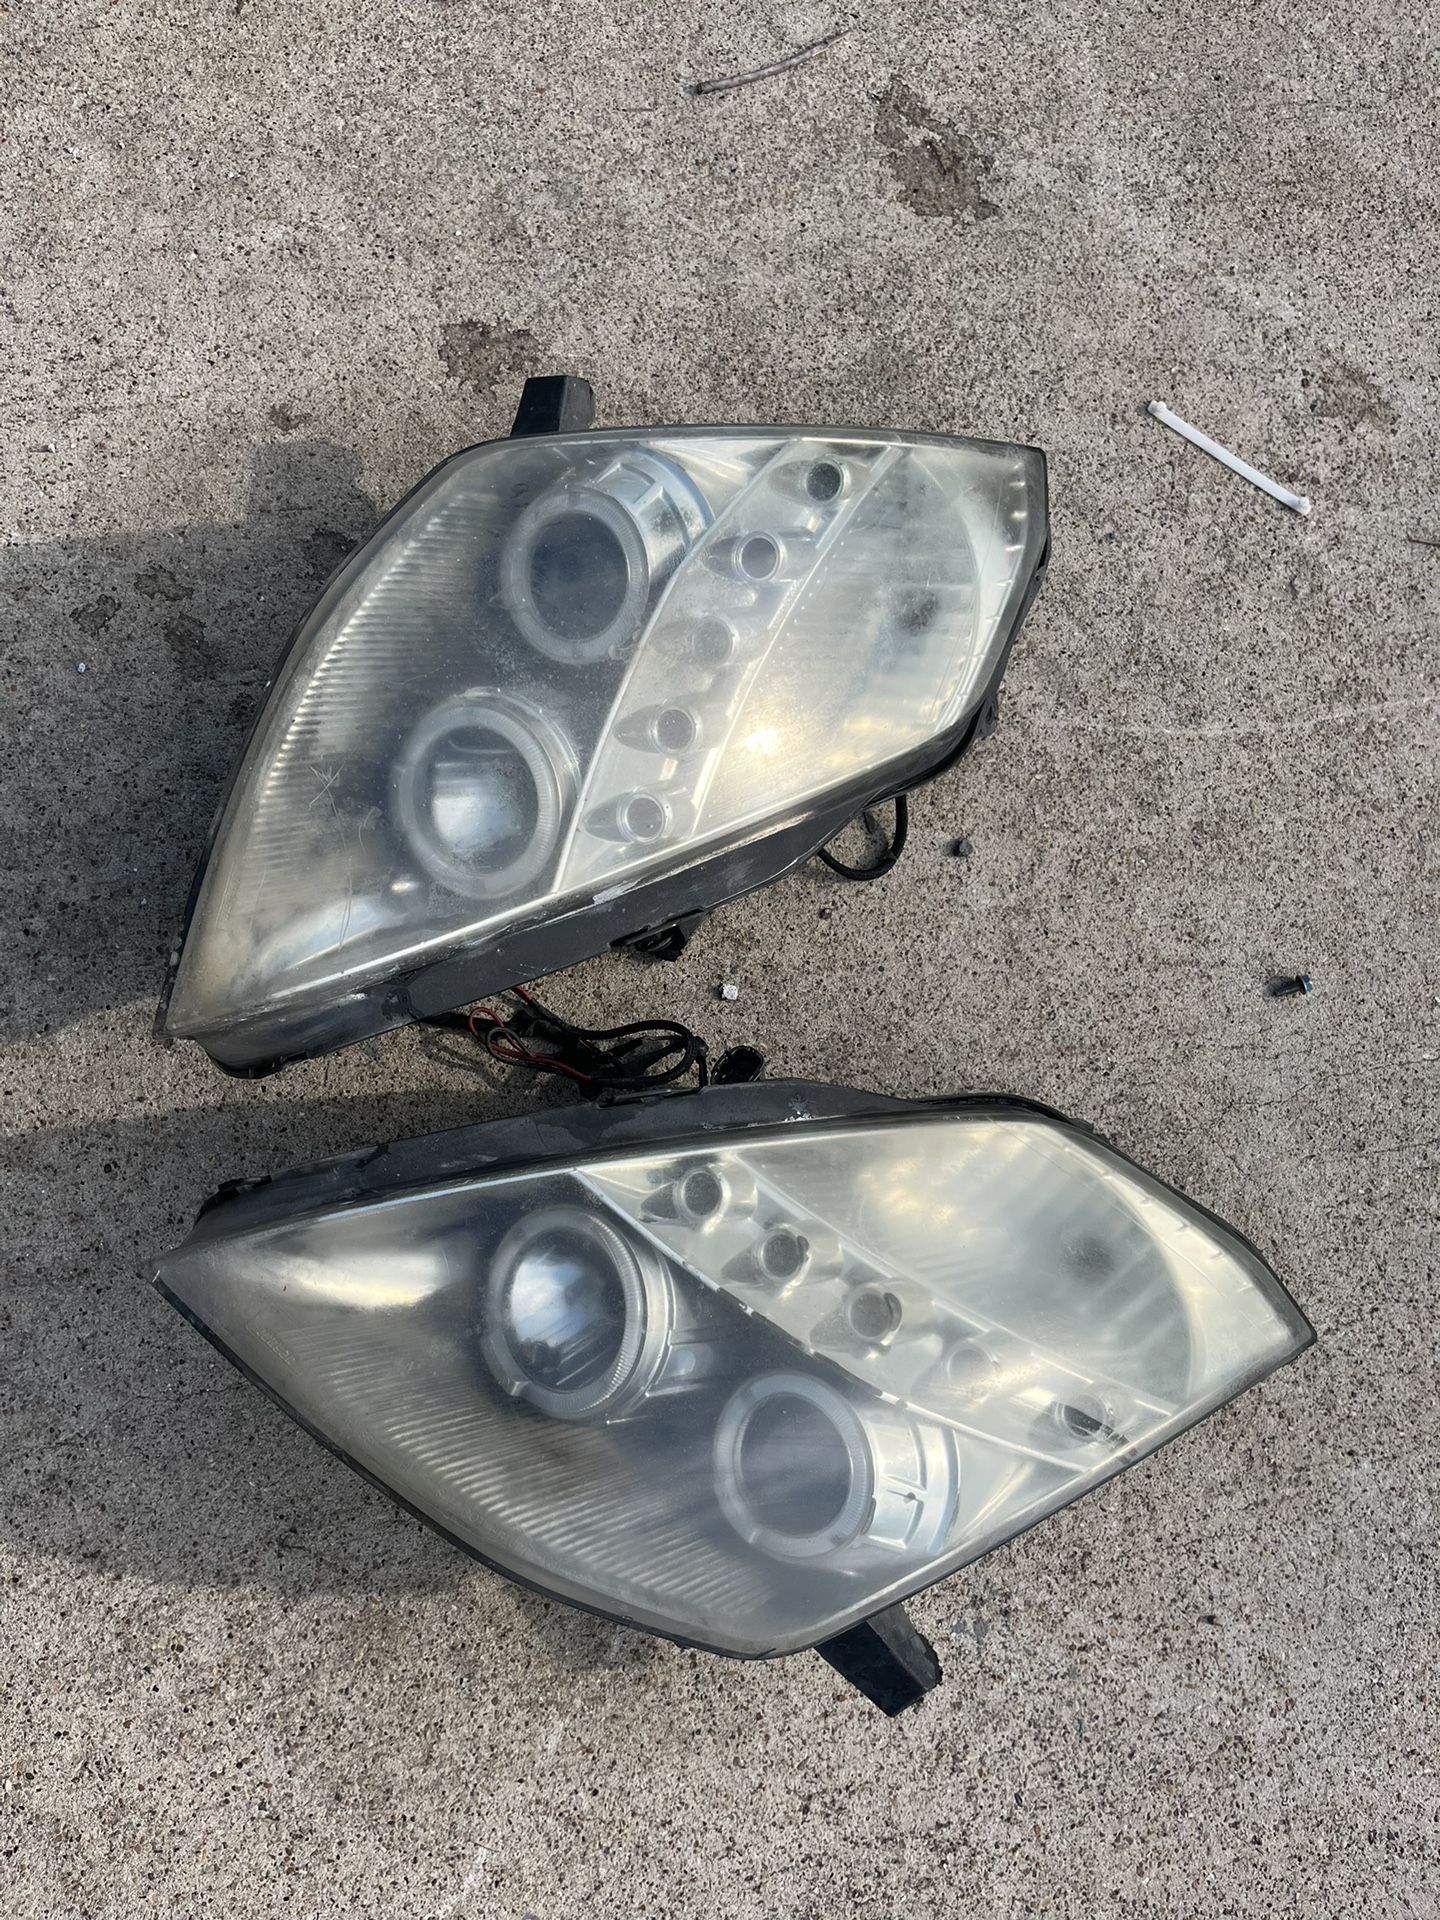 Headlights For 350z 